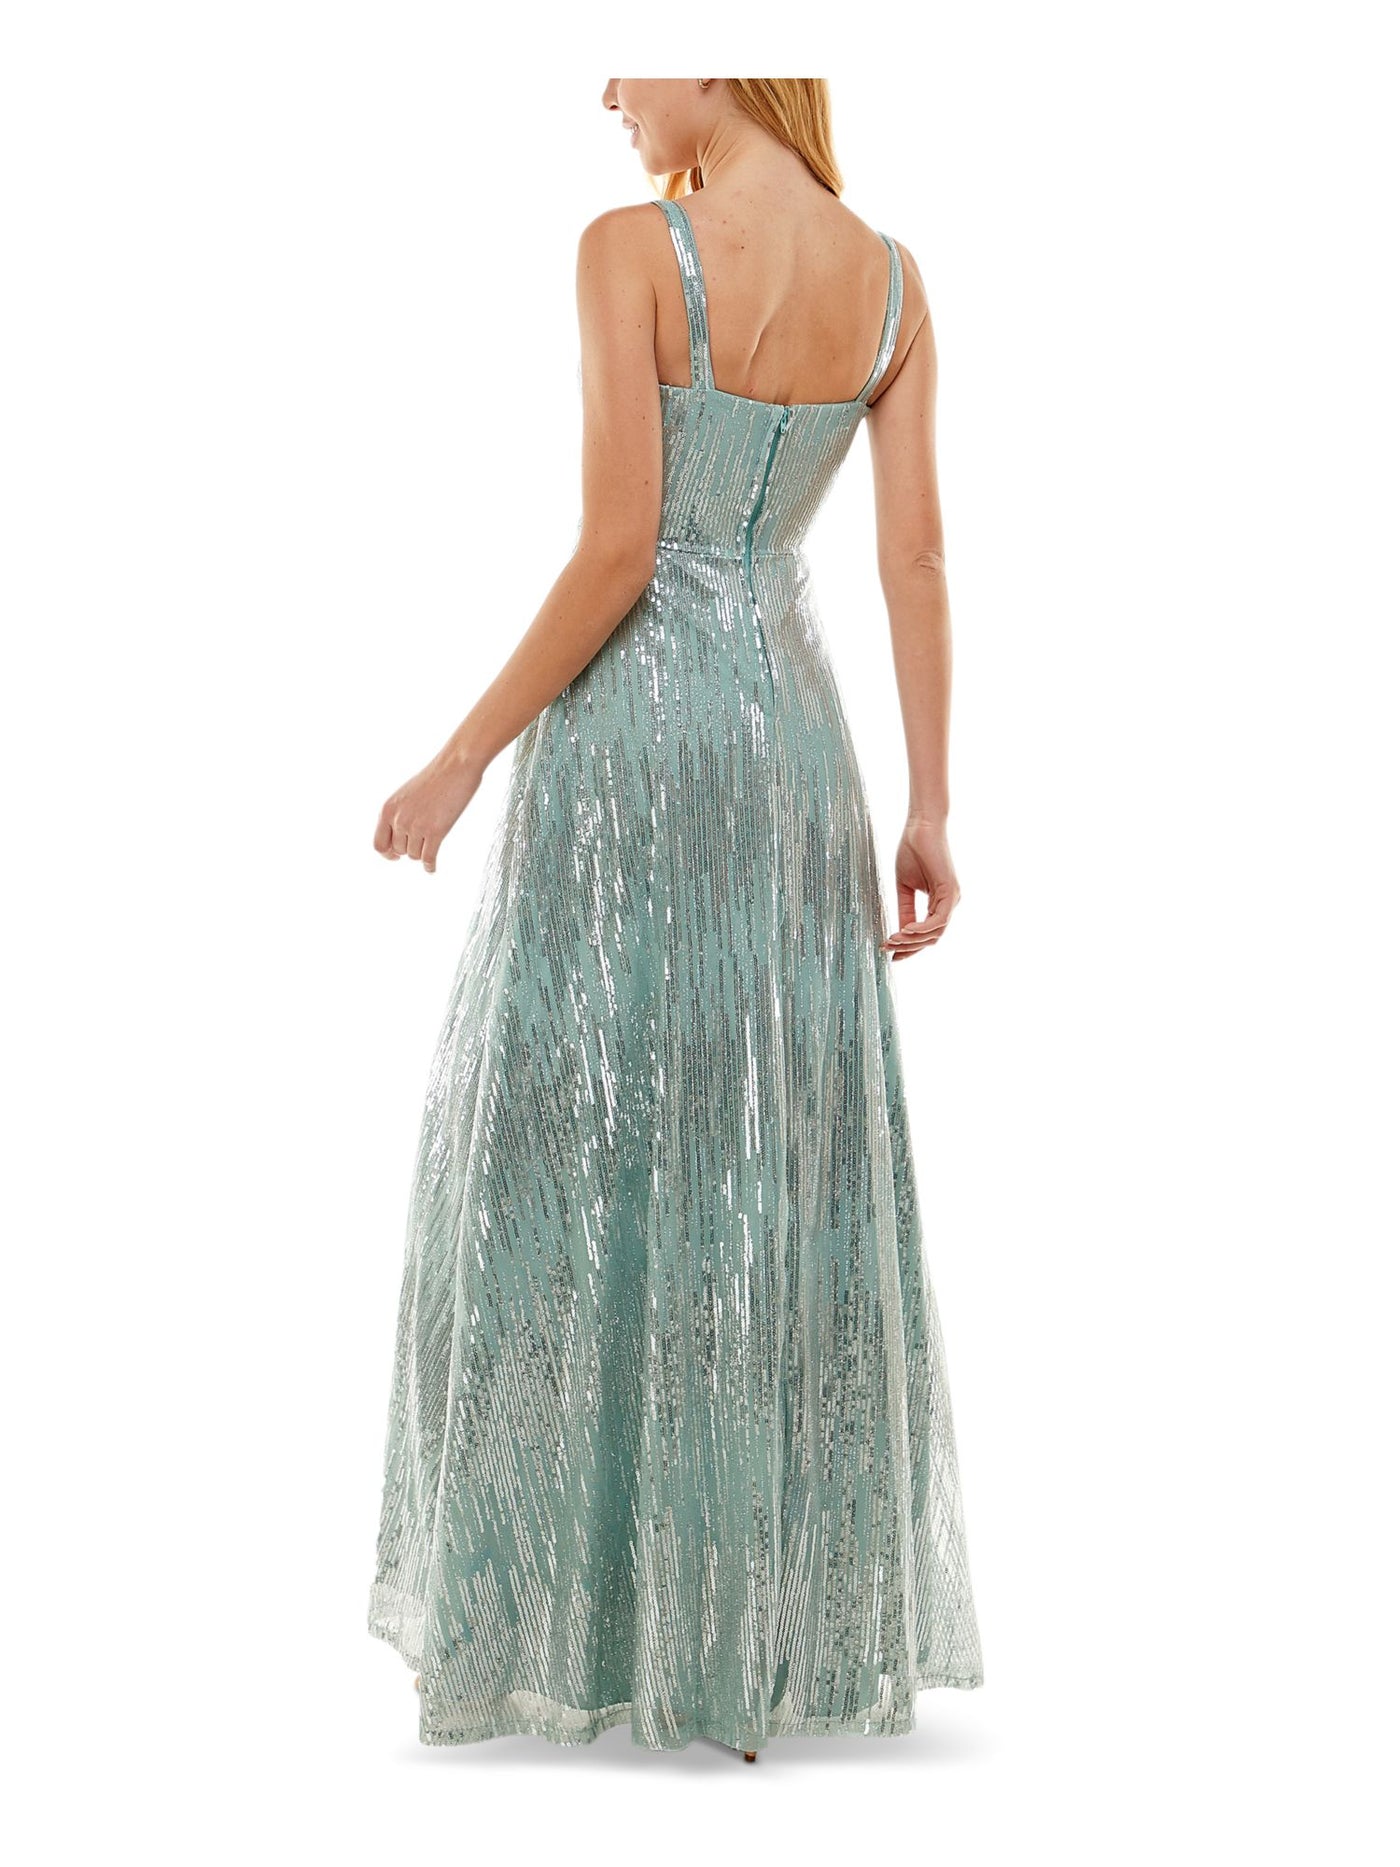 SAY YES TO THE PROM Womens Turquoise Sequined Zippered Lined Sleeveless Square Neck Full-Length Formal Gown Dress Juniors 3